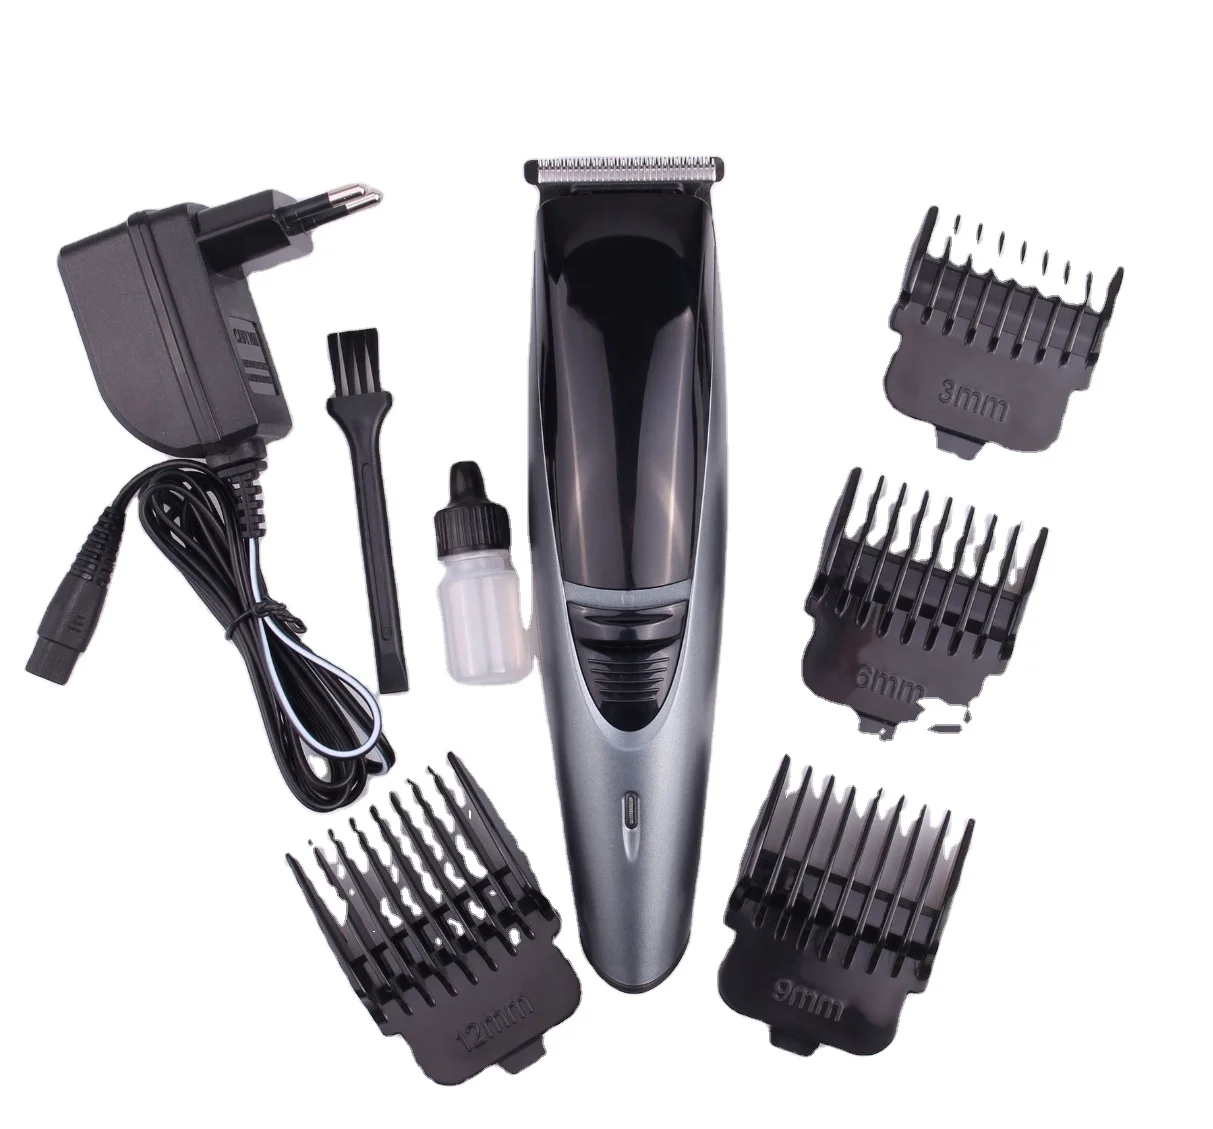 hair trimmer used in salon